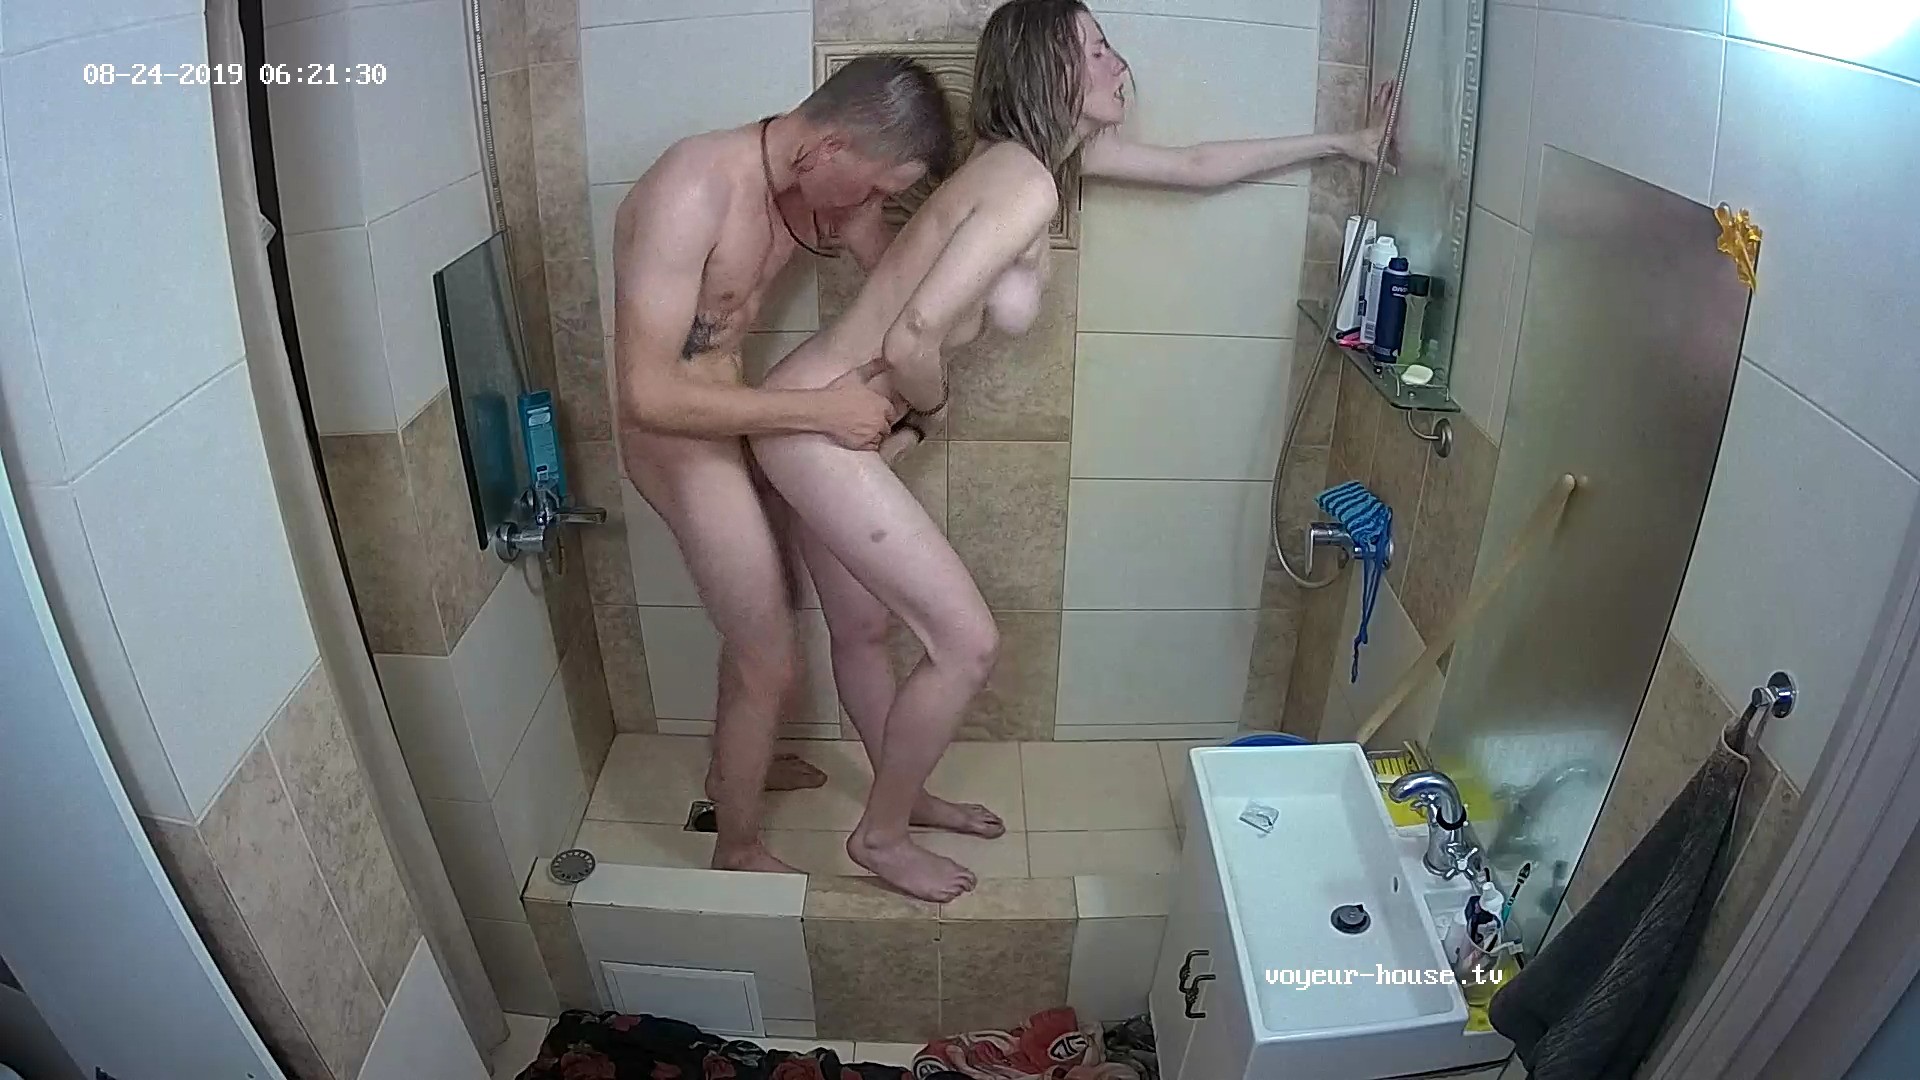 Watch Shower man Derek and Guest Girl Shower Sex 24 Aug 2019 Naked people with Dexter and Kelly in Bathroom The biggest Voyeur Videos gallery